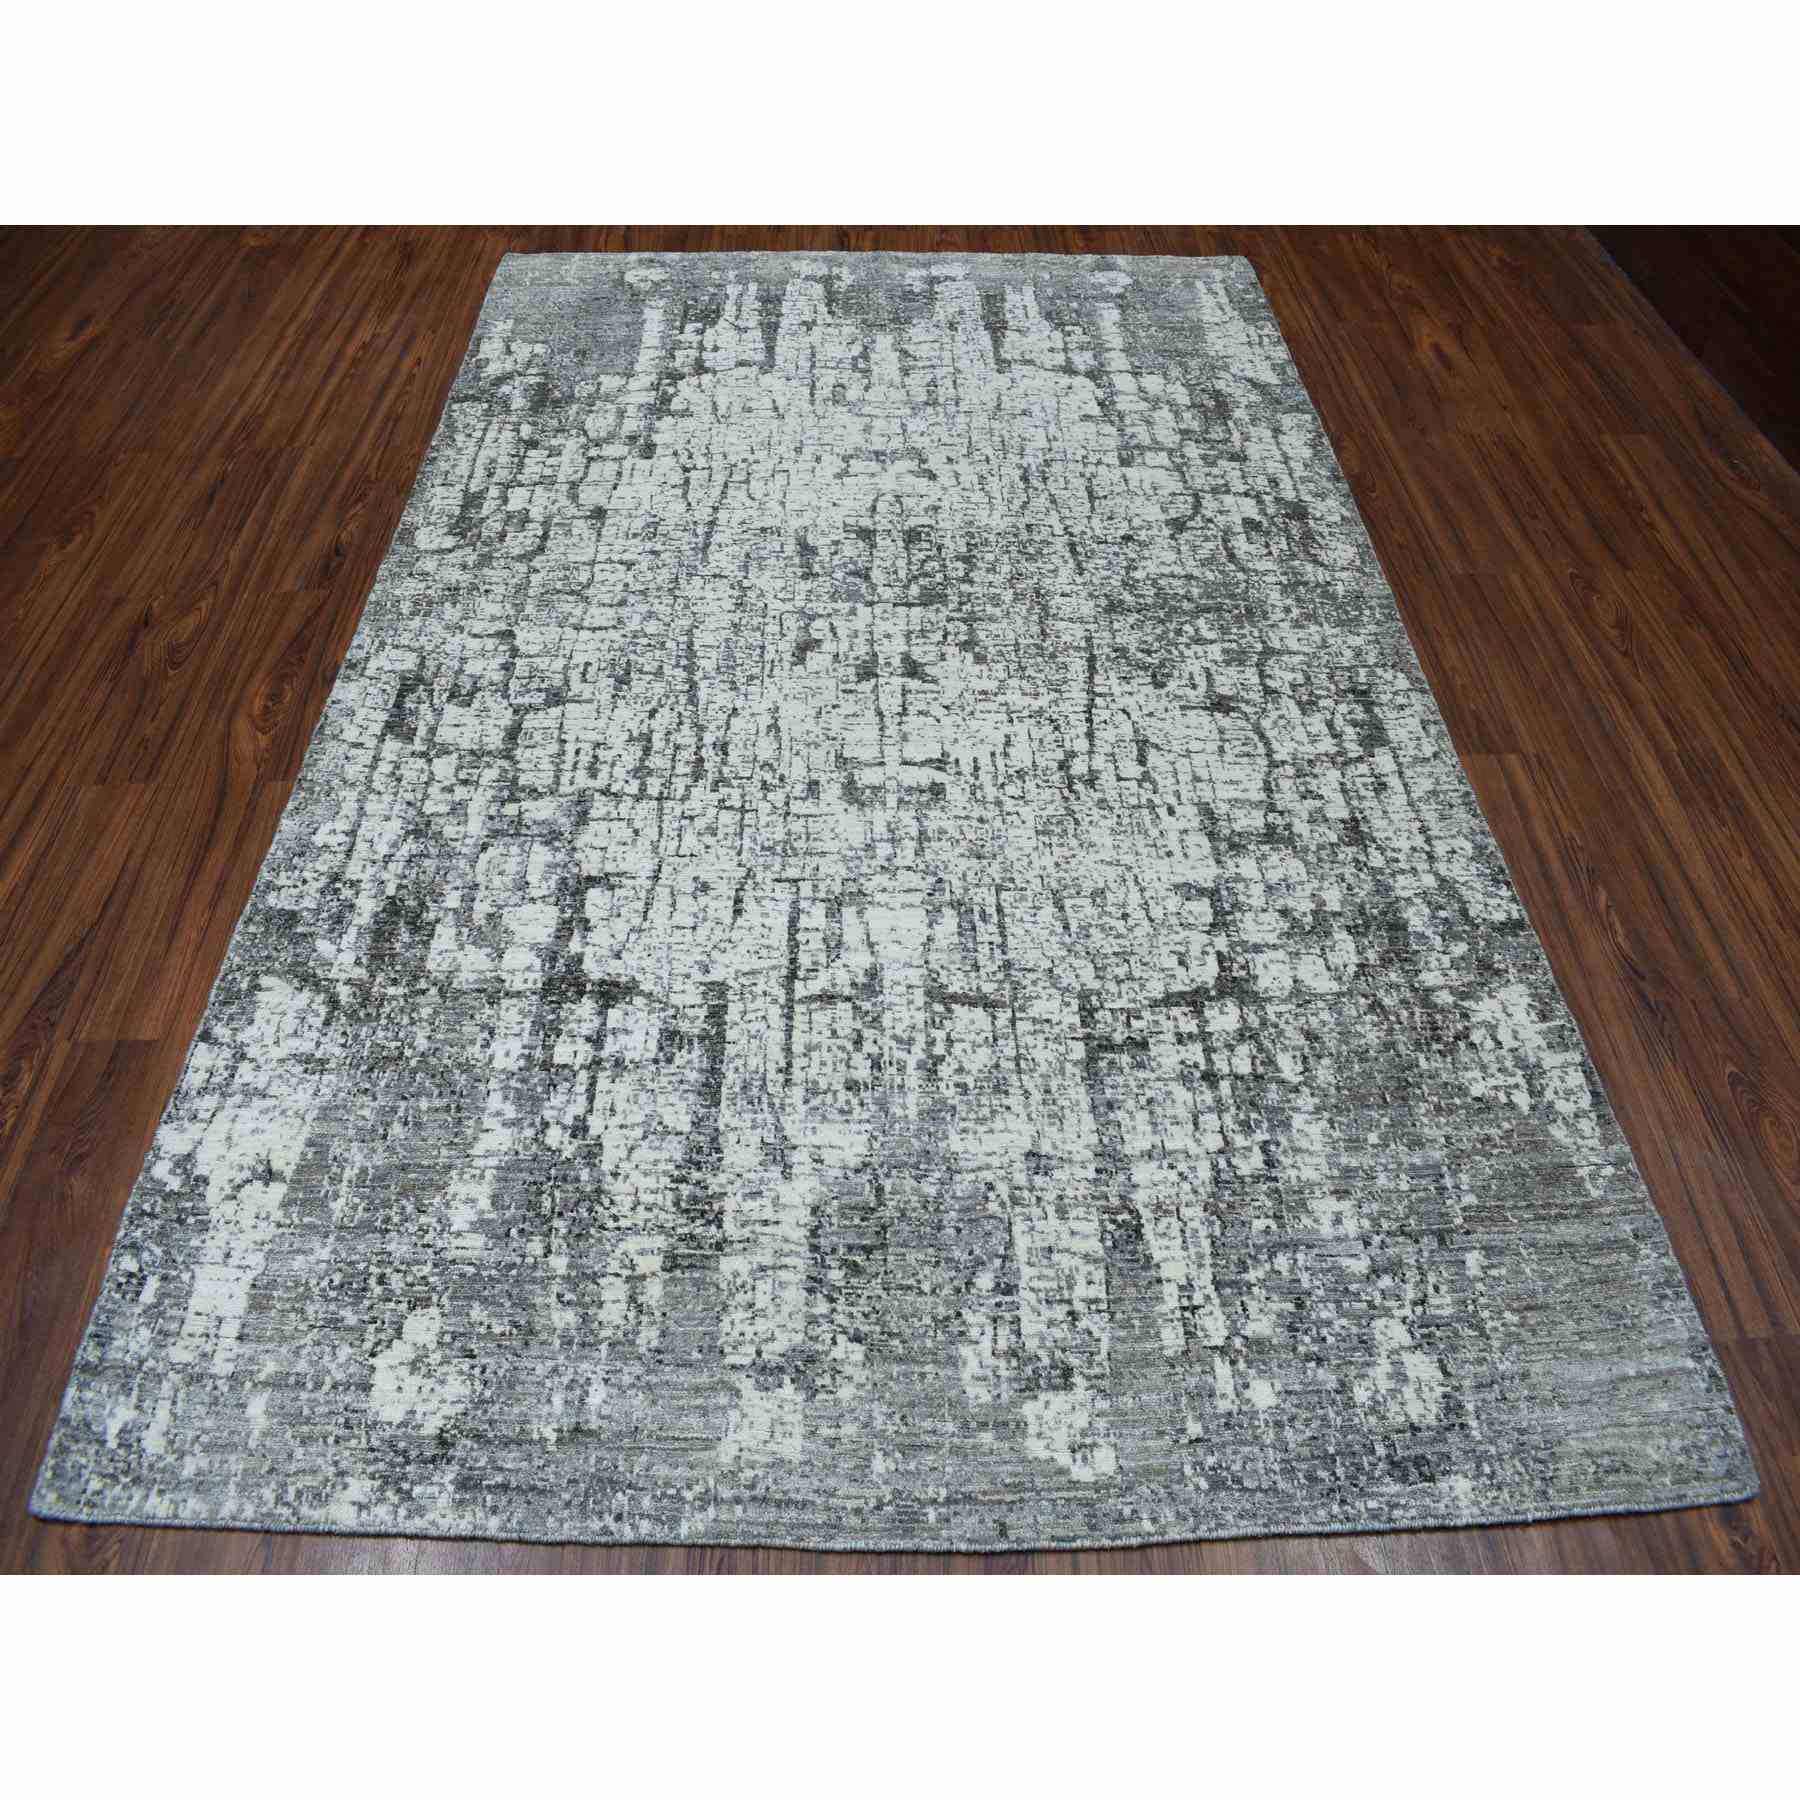 5-9 x9- THE TREE BARK Abstract Design Hand-Knotted Soft Wool Rug 